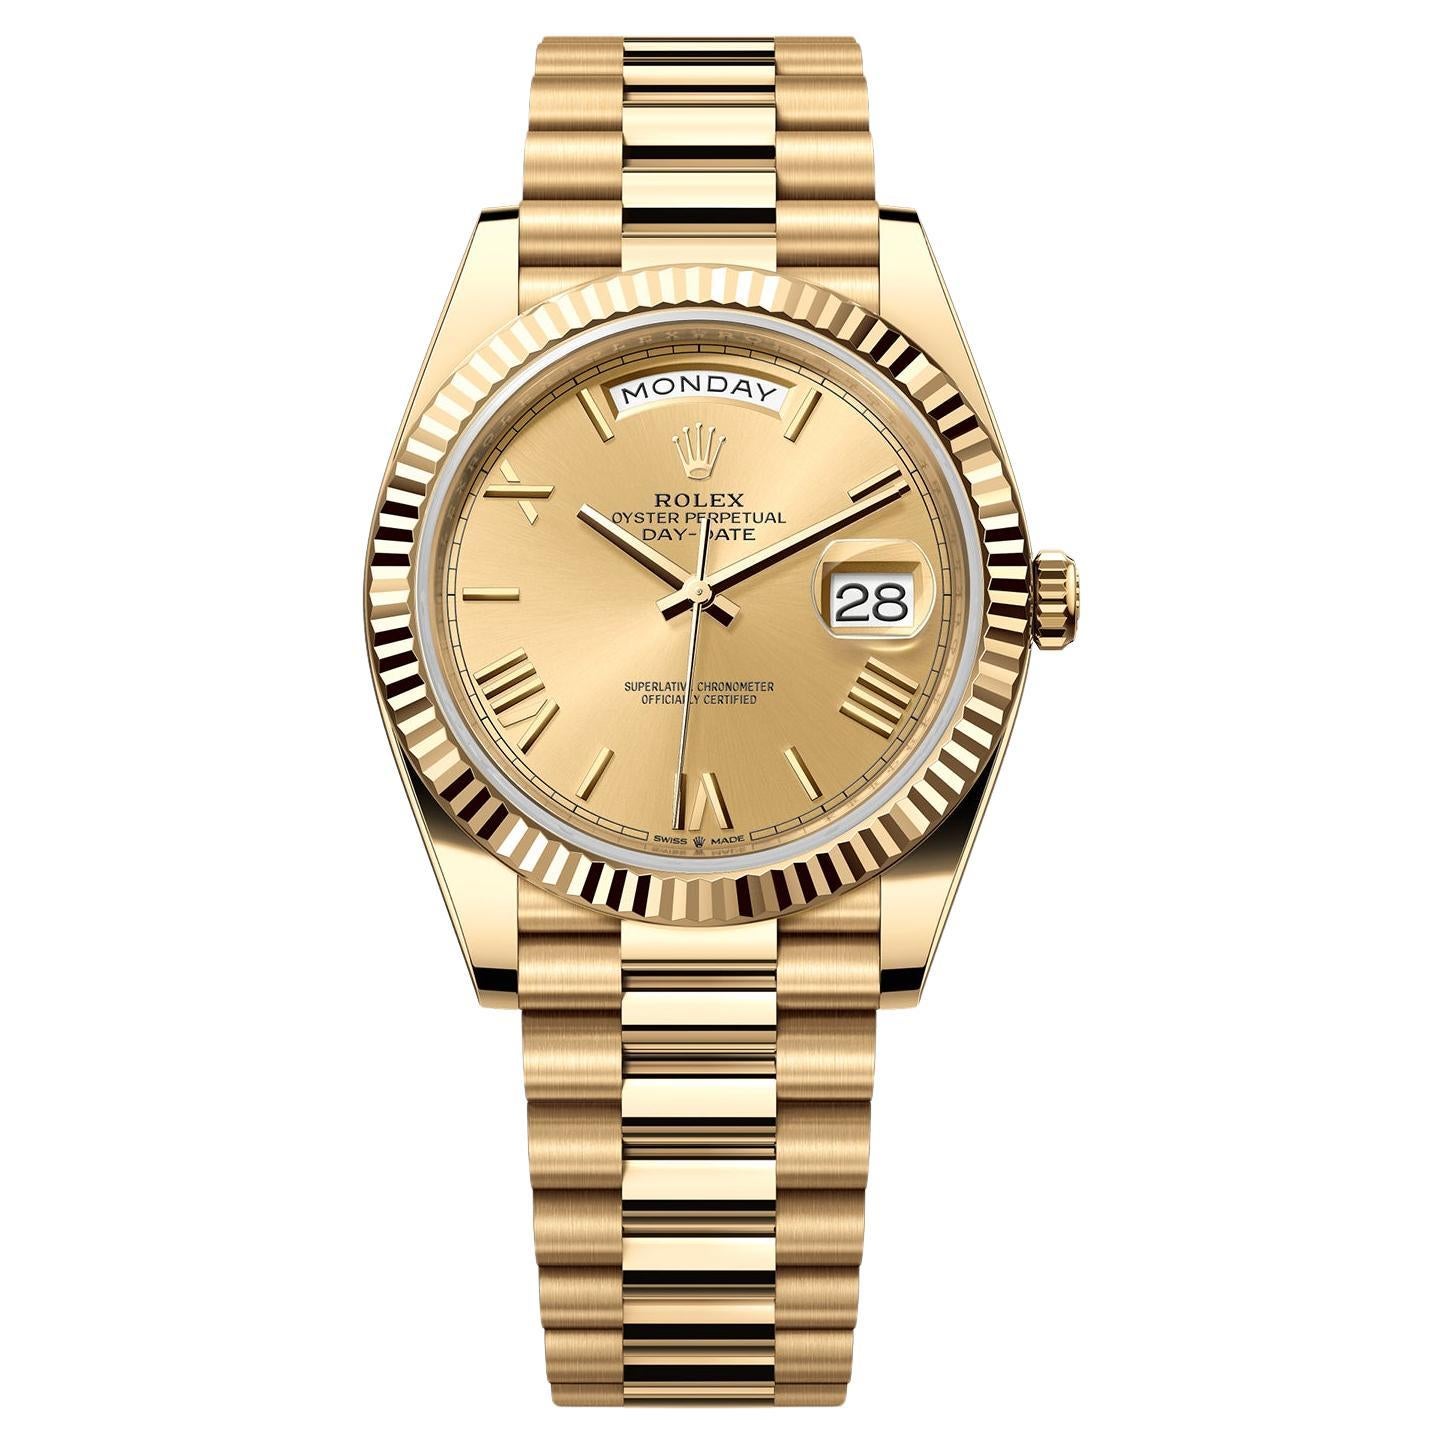 Rolex Day-Date 40mm President Yellow Gold Champagne Roman Dial Watch 228238